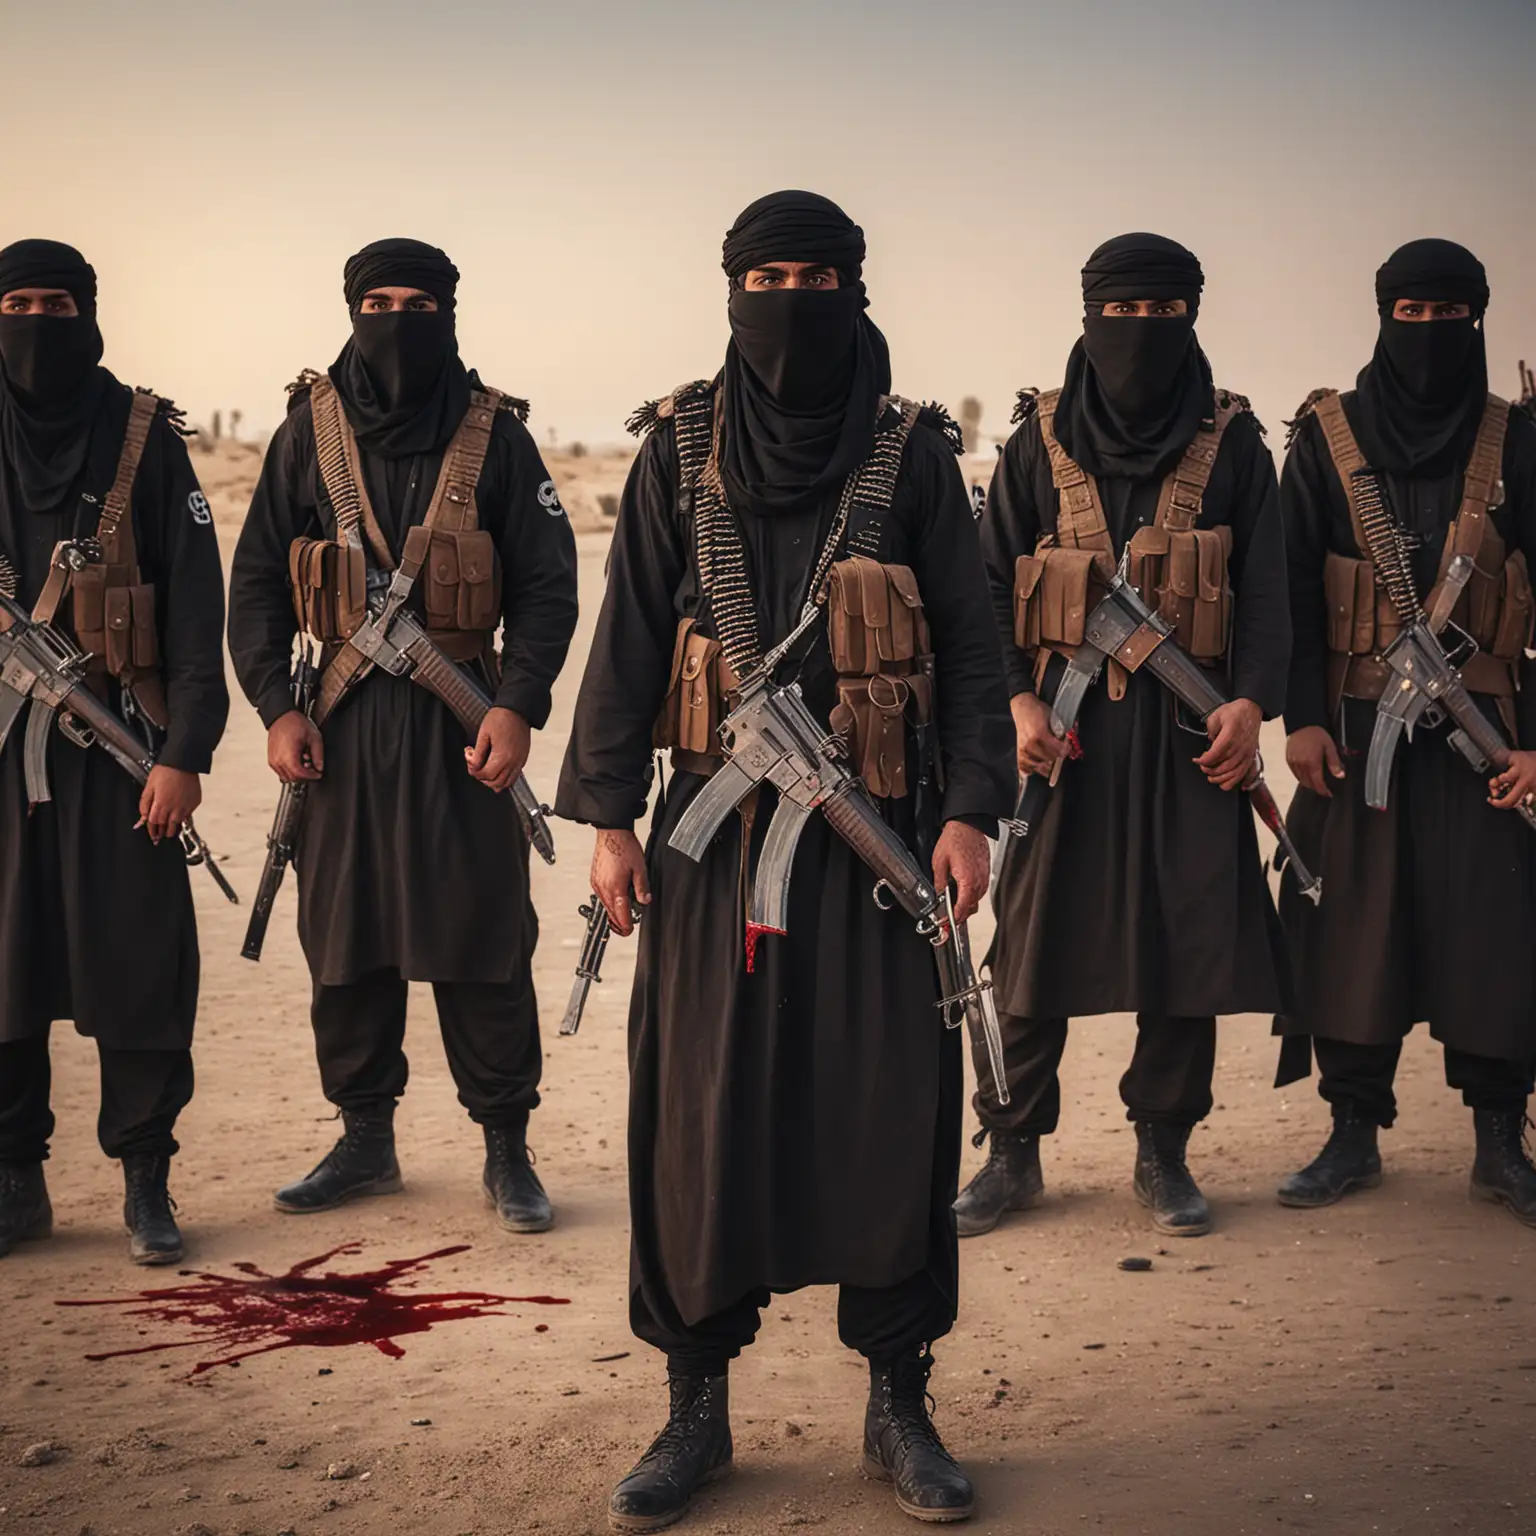 isis terrorists in the middle east with blood and swords. looking at the camera